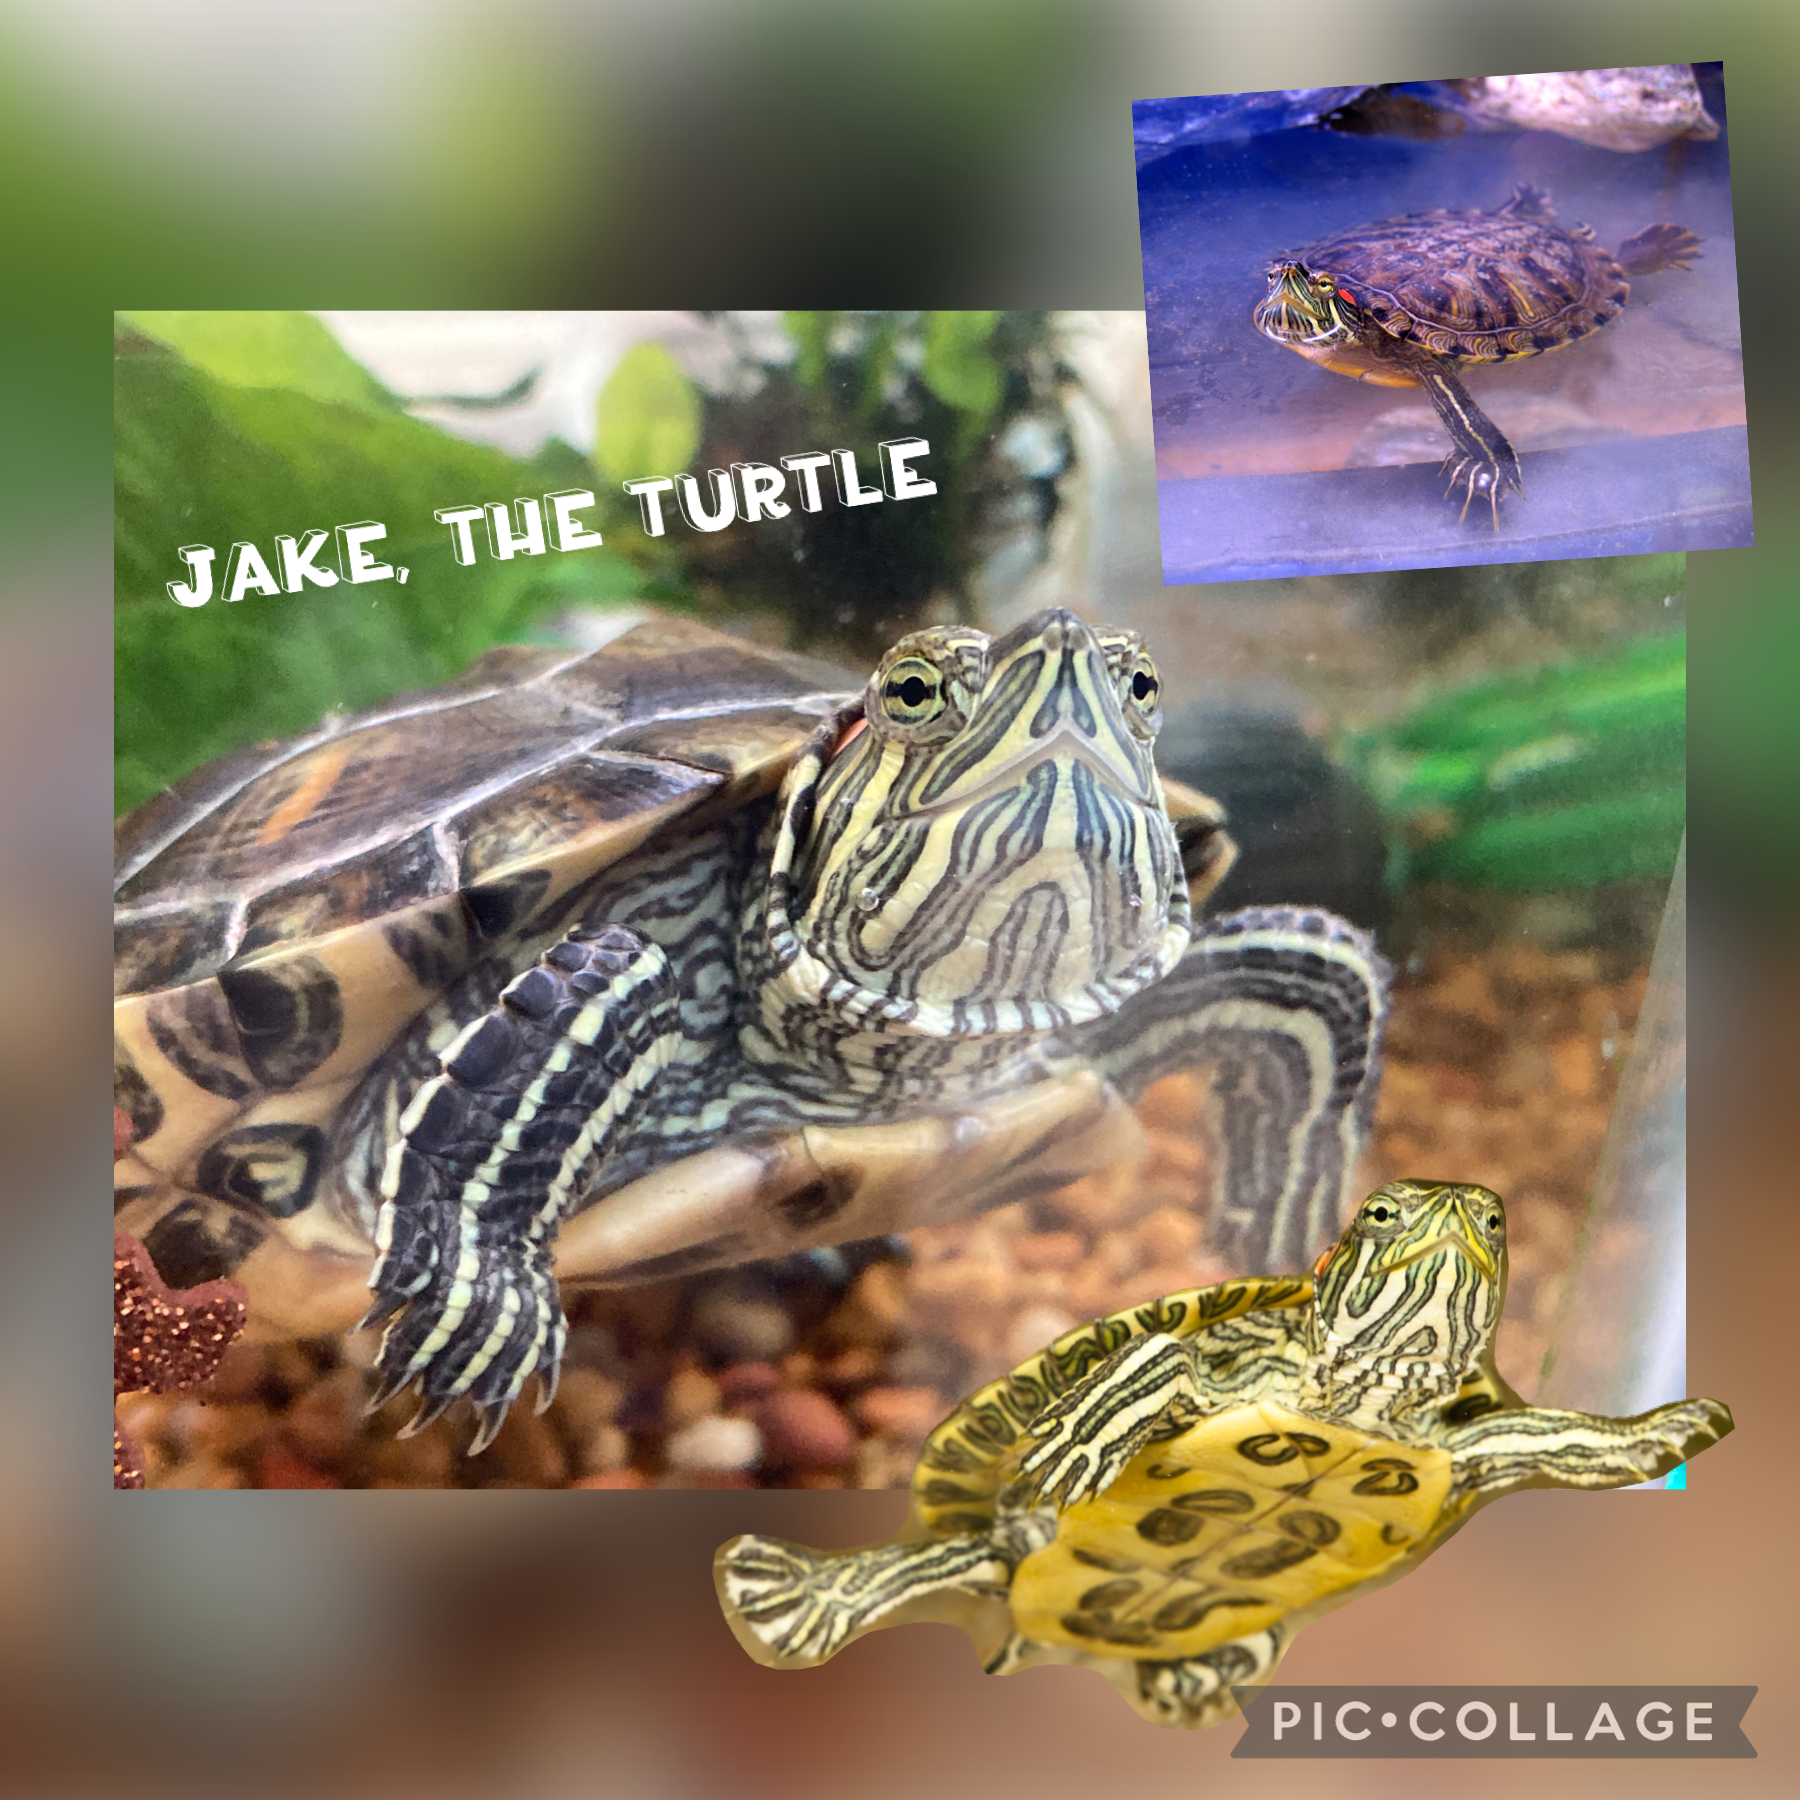 My Turtle, Jake. 

I did a collage of my turtle and others from the Internet!
-Mango